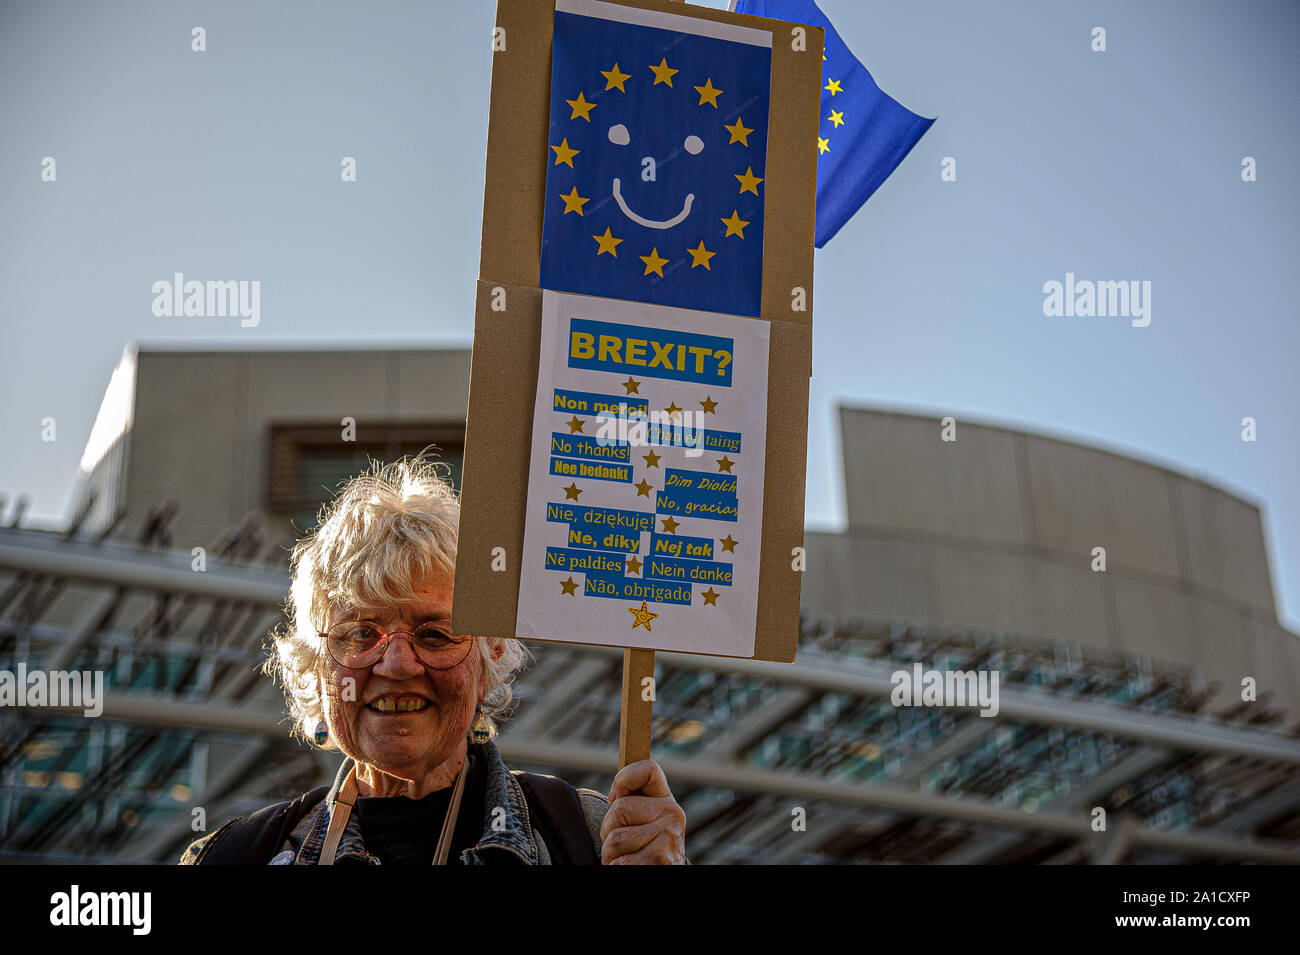 A protester holding a placard during the protest.Organized by European Movement in Scotland as well as Edinburgh For Europe, protesters took to the streets of Edinburgh to demand MPs revoke Article 50 to prevent a no-deal and that the EU shares a notion to combat climate change. Stock Photo